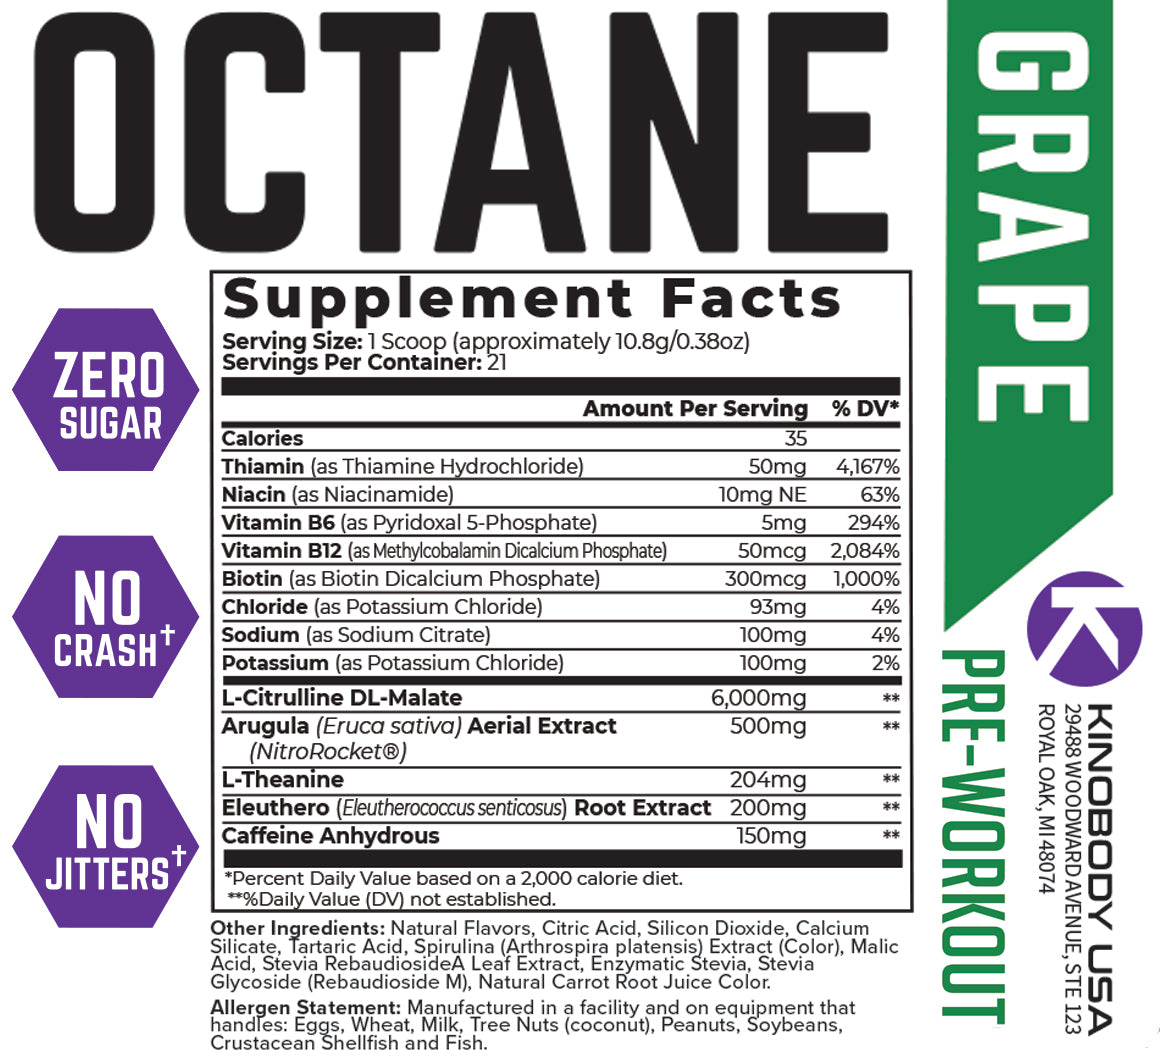 Test Product (Kino Octane Pre-Workout: Improve Workout Performance & Energy)